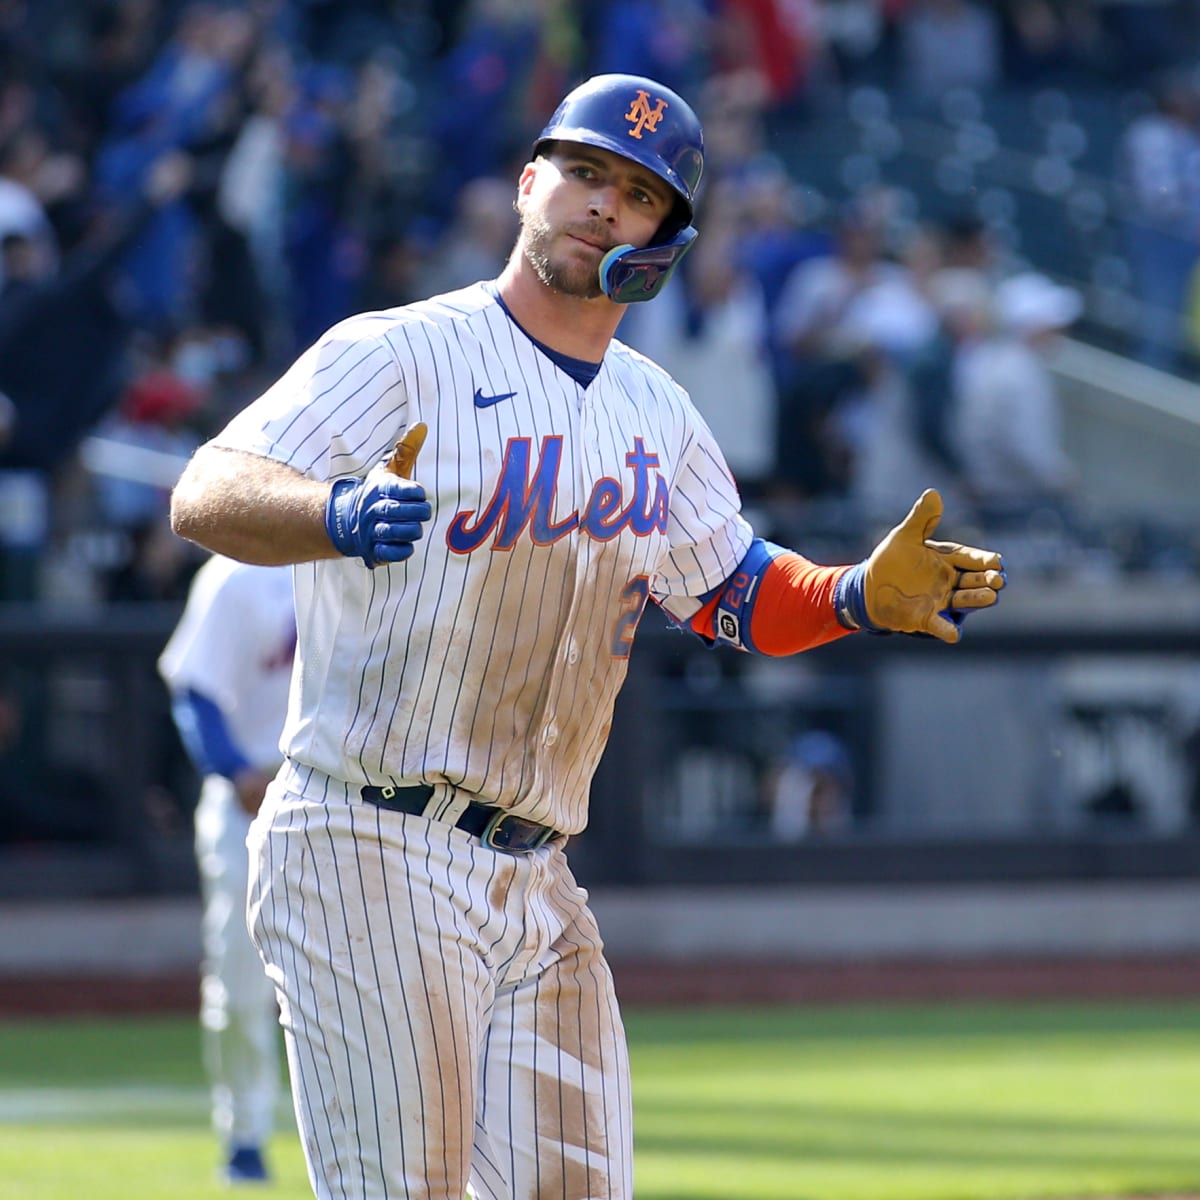 Mets analysis: Jeff McNeil is a cornerstone of the Mets lineup in